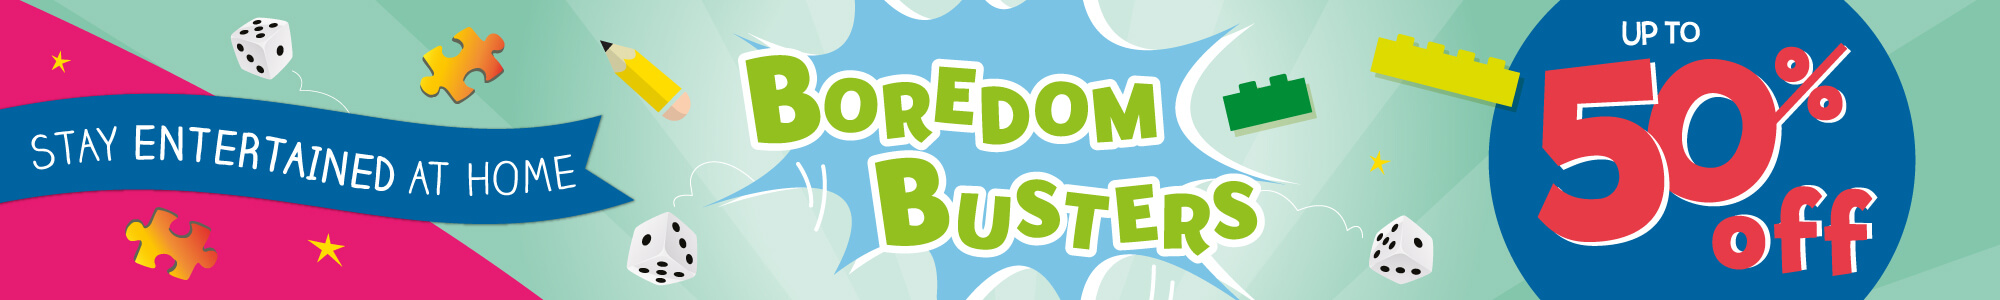 Boredom-Busters-Page-2000x300px-.jpg